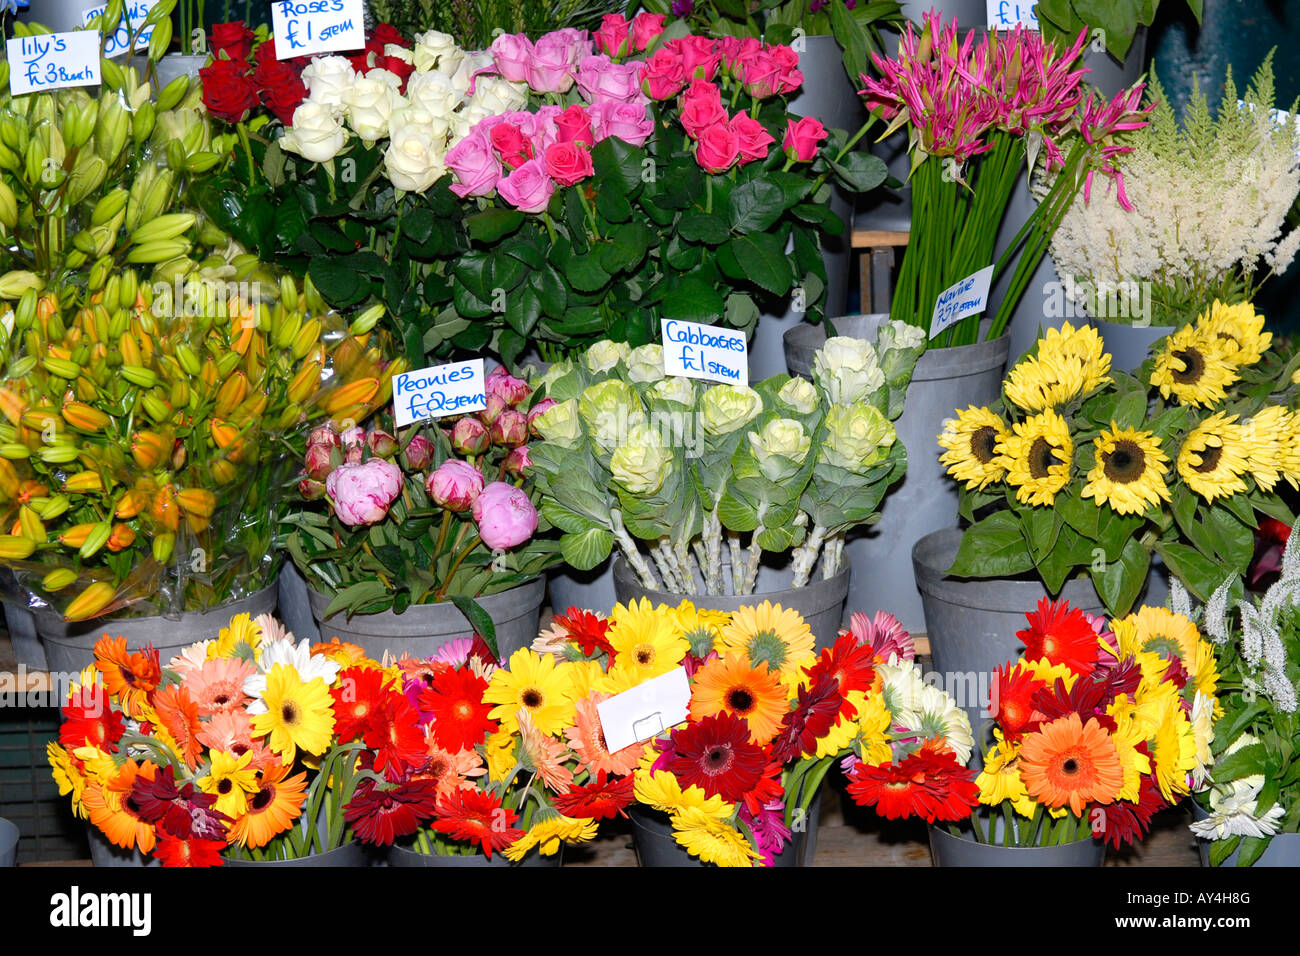 London Borough Market , fresh cut flowers stall display with lilies , roses , peonies , cabbages , sunflowers & navines Stock Photo